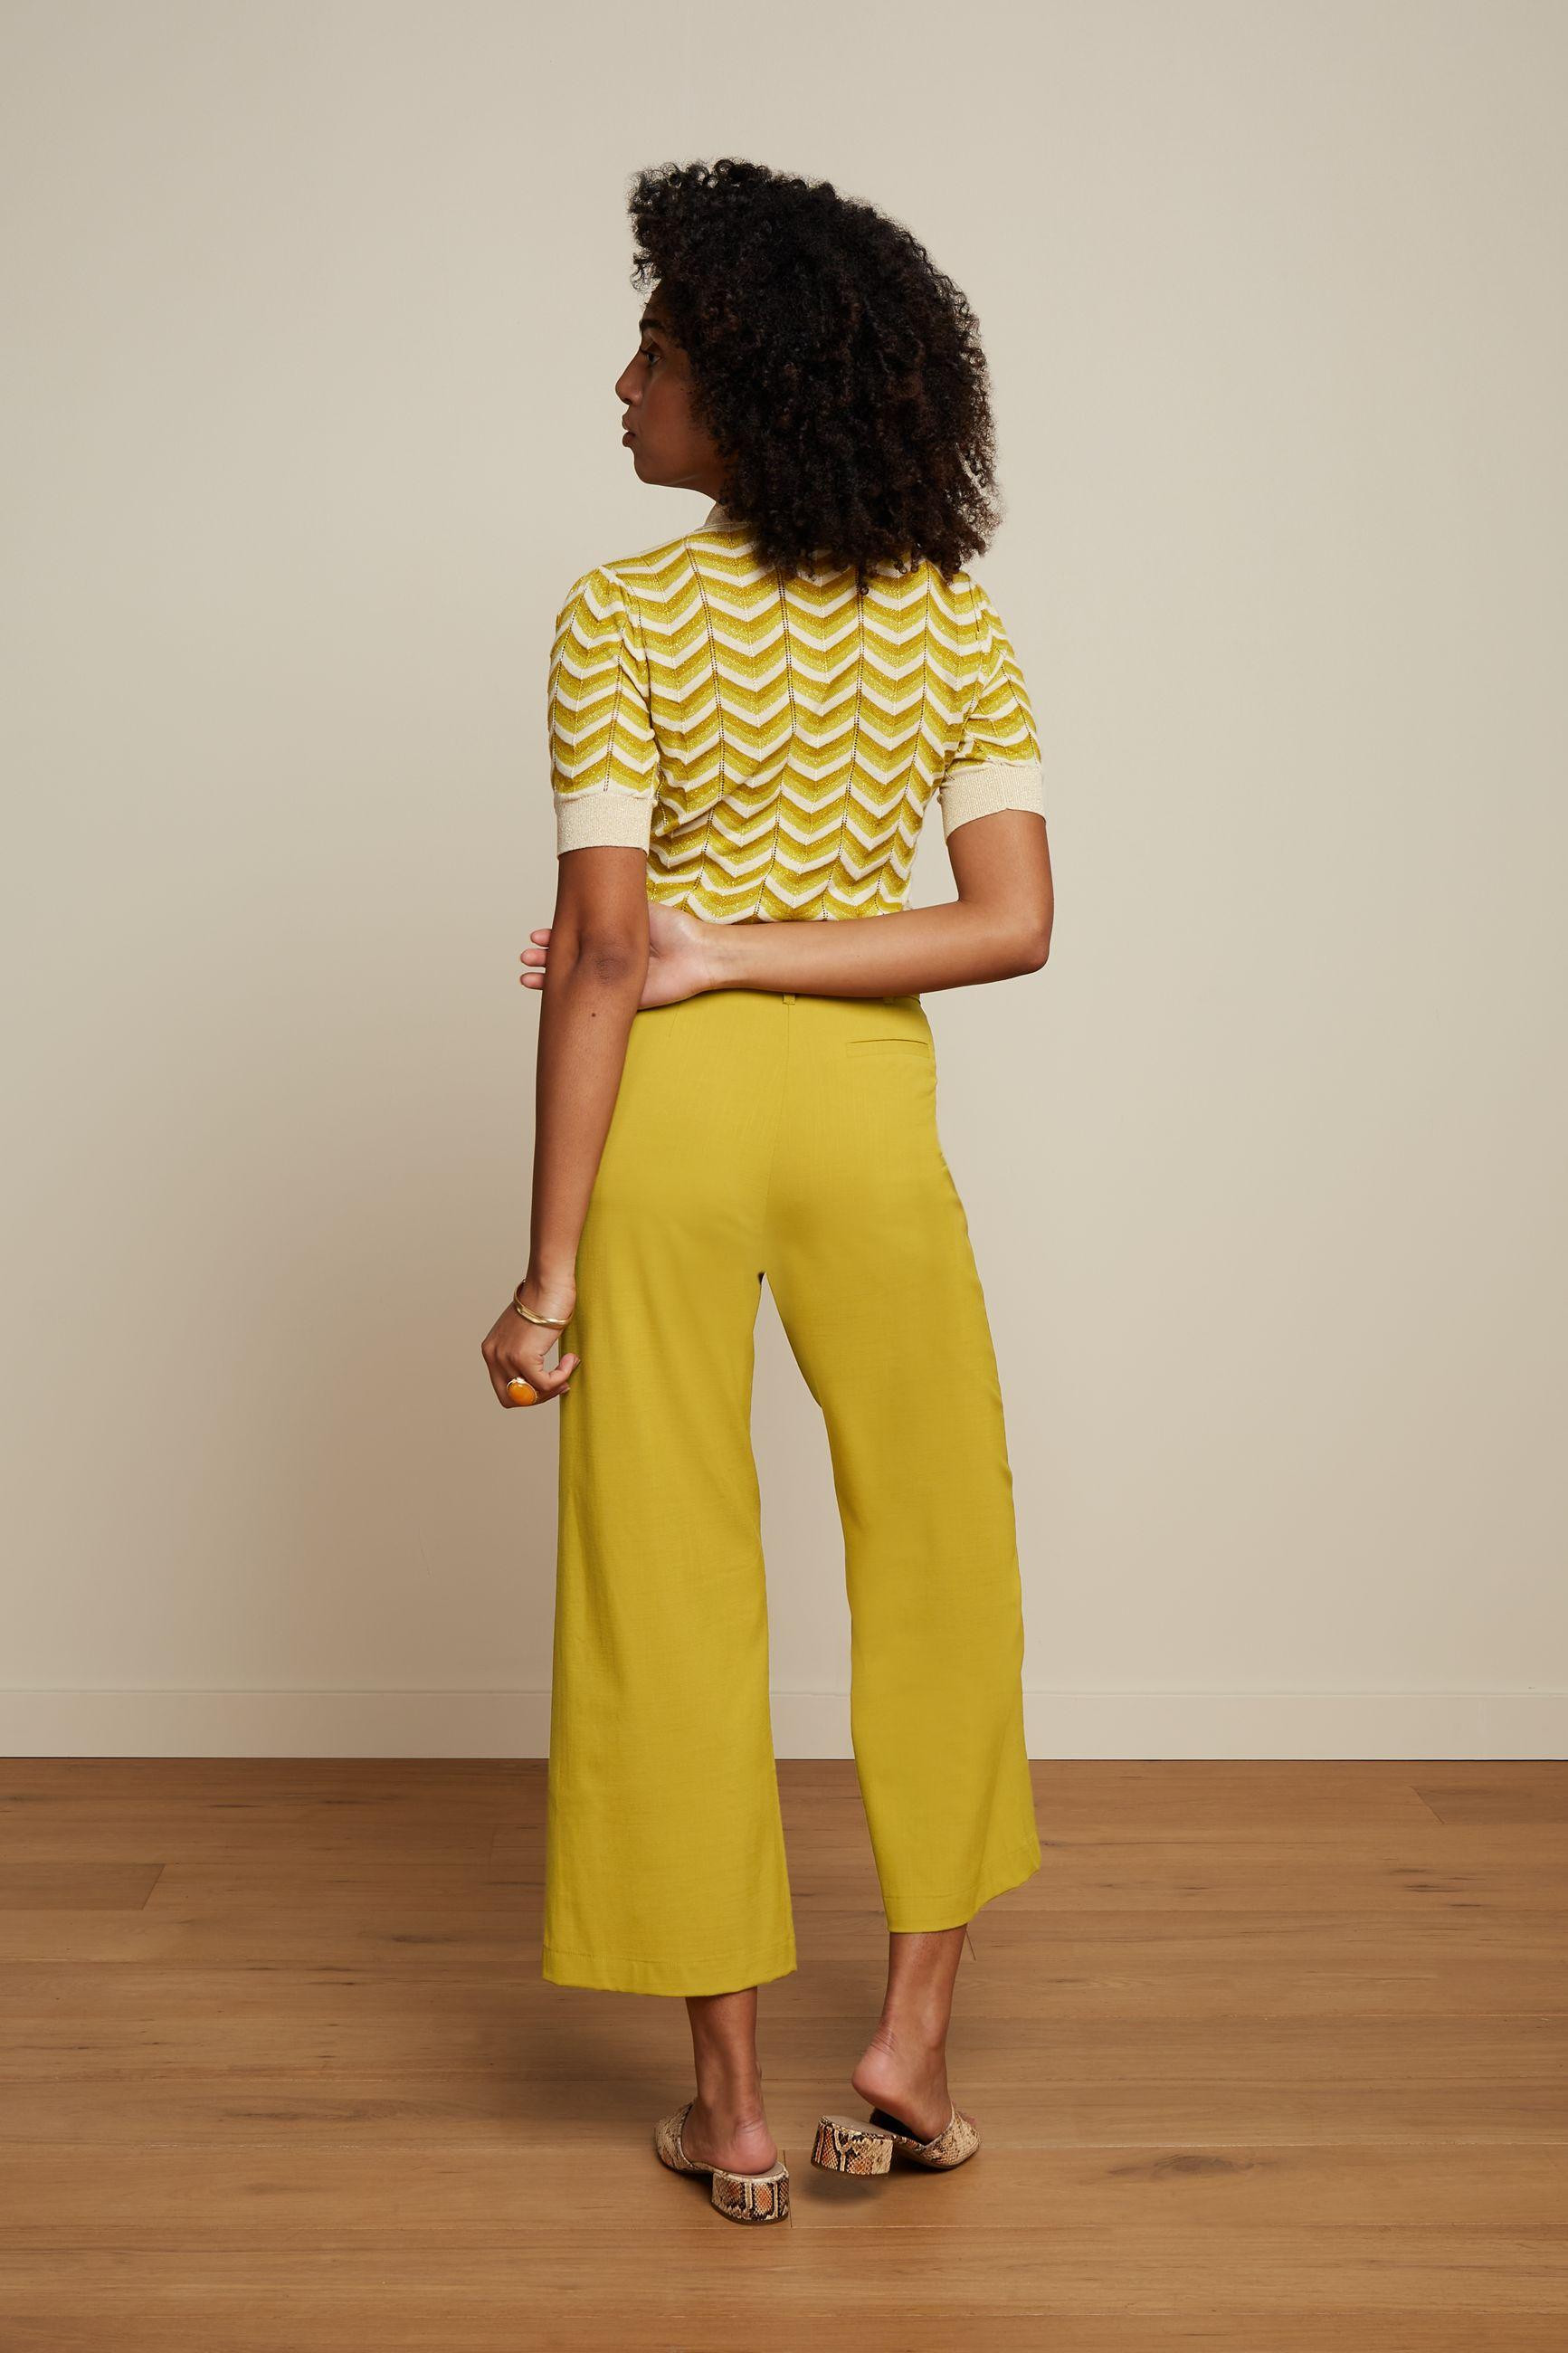 King Louie Polo Top Mandry, Farbe: Cress Yellow